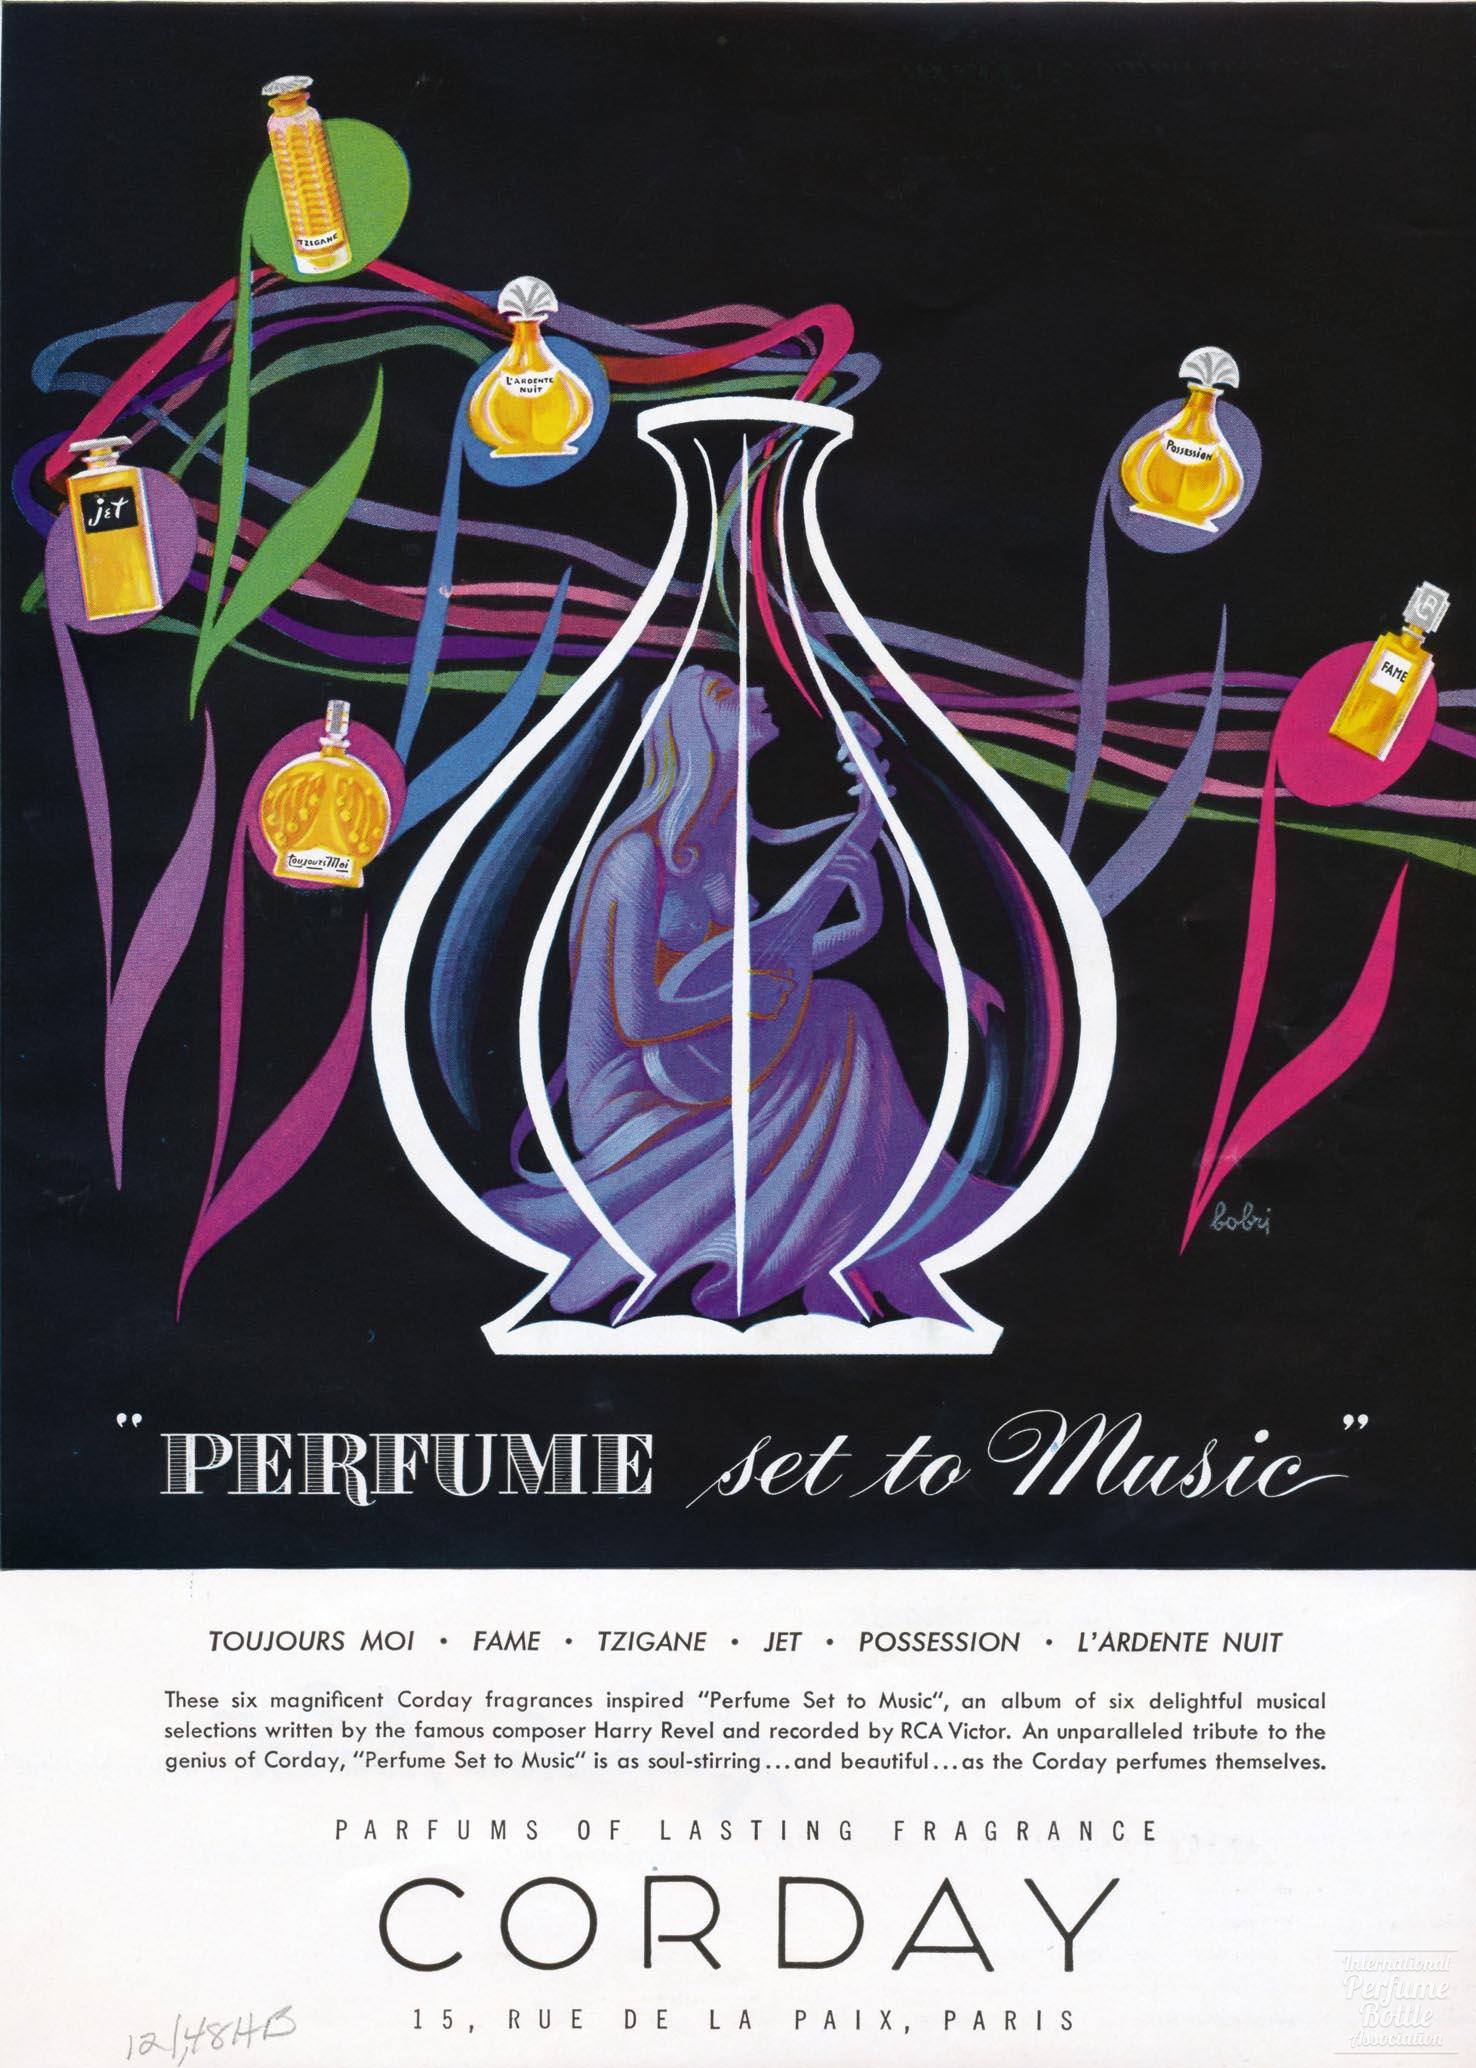 "Perfume Set to Music" by Corday Advertisement - 1948